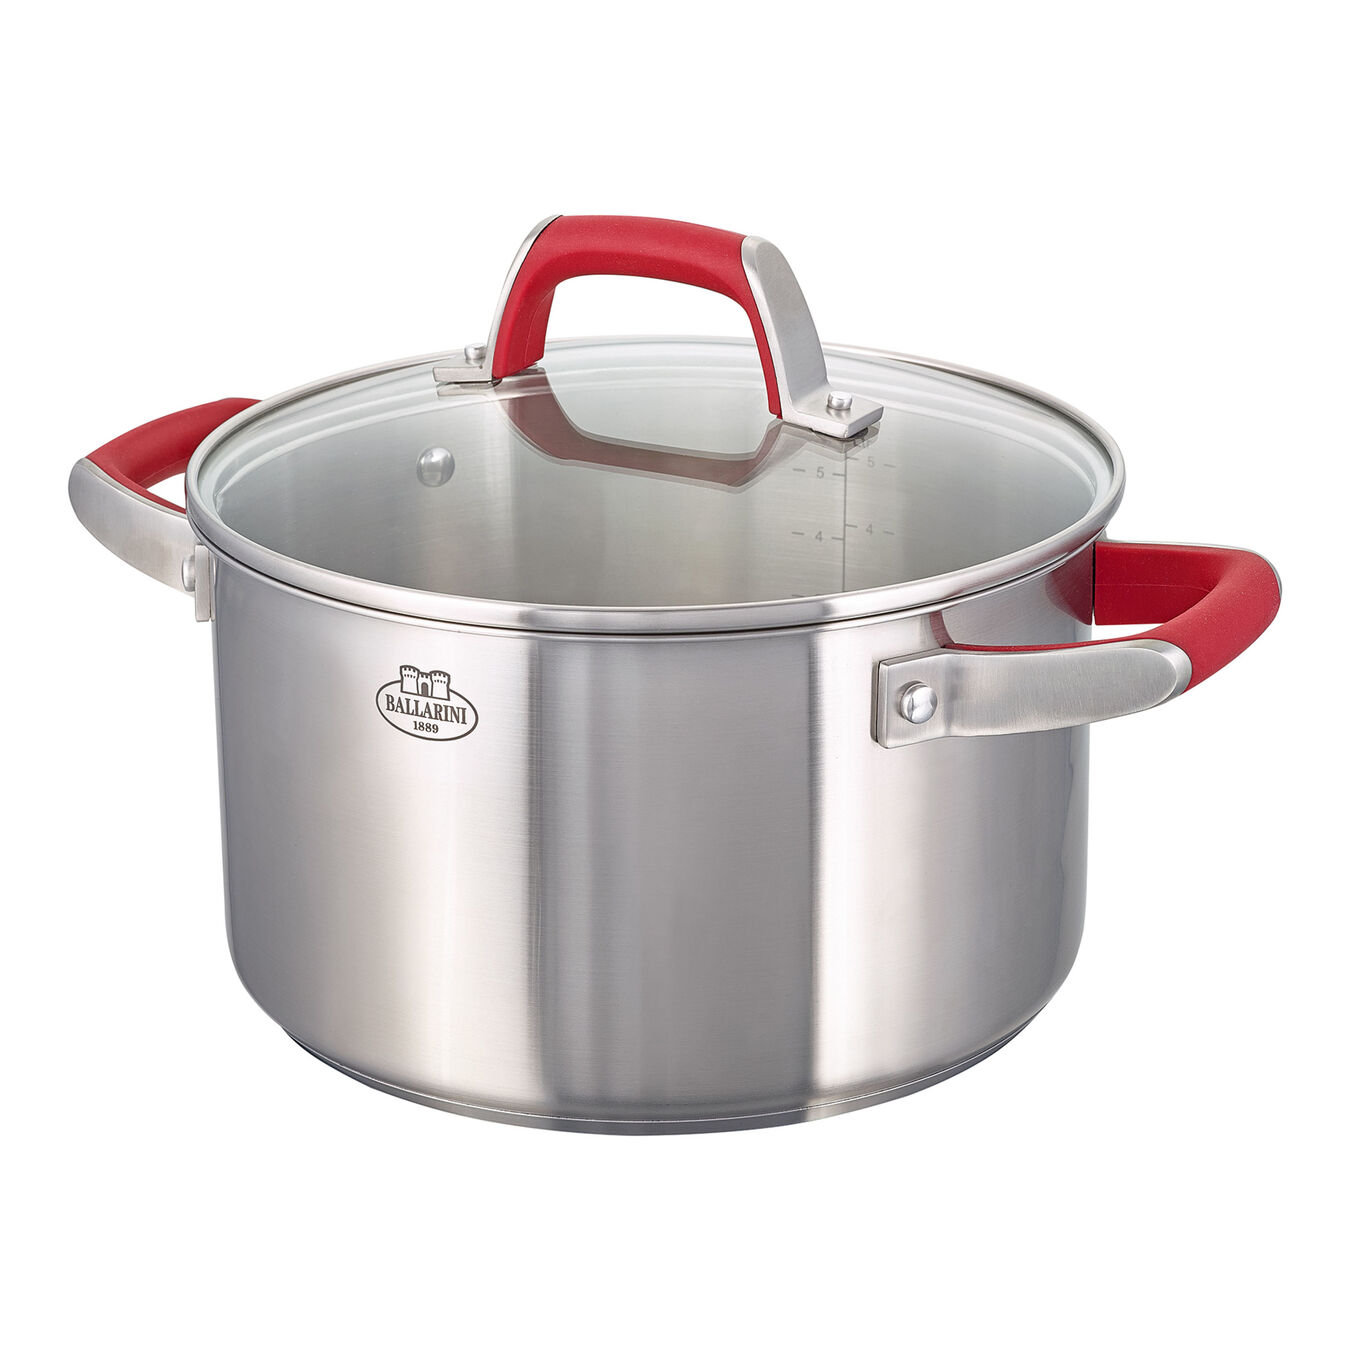  18/10 Stainless Steel Stock pot,,large 1